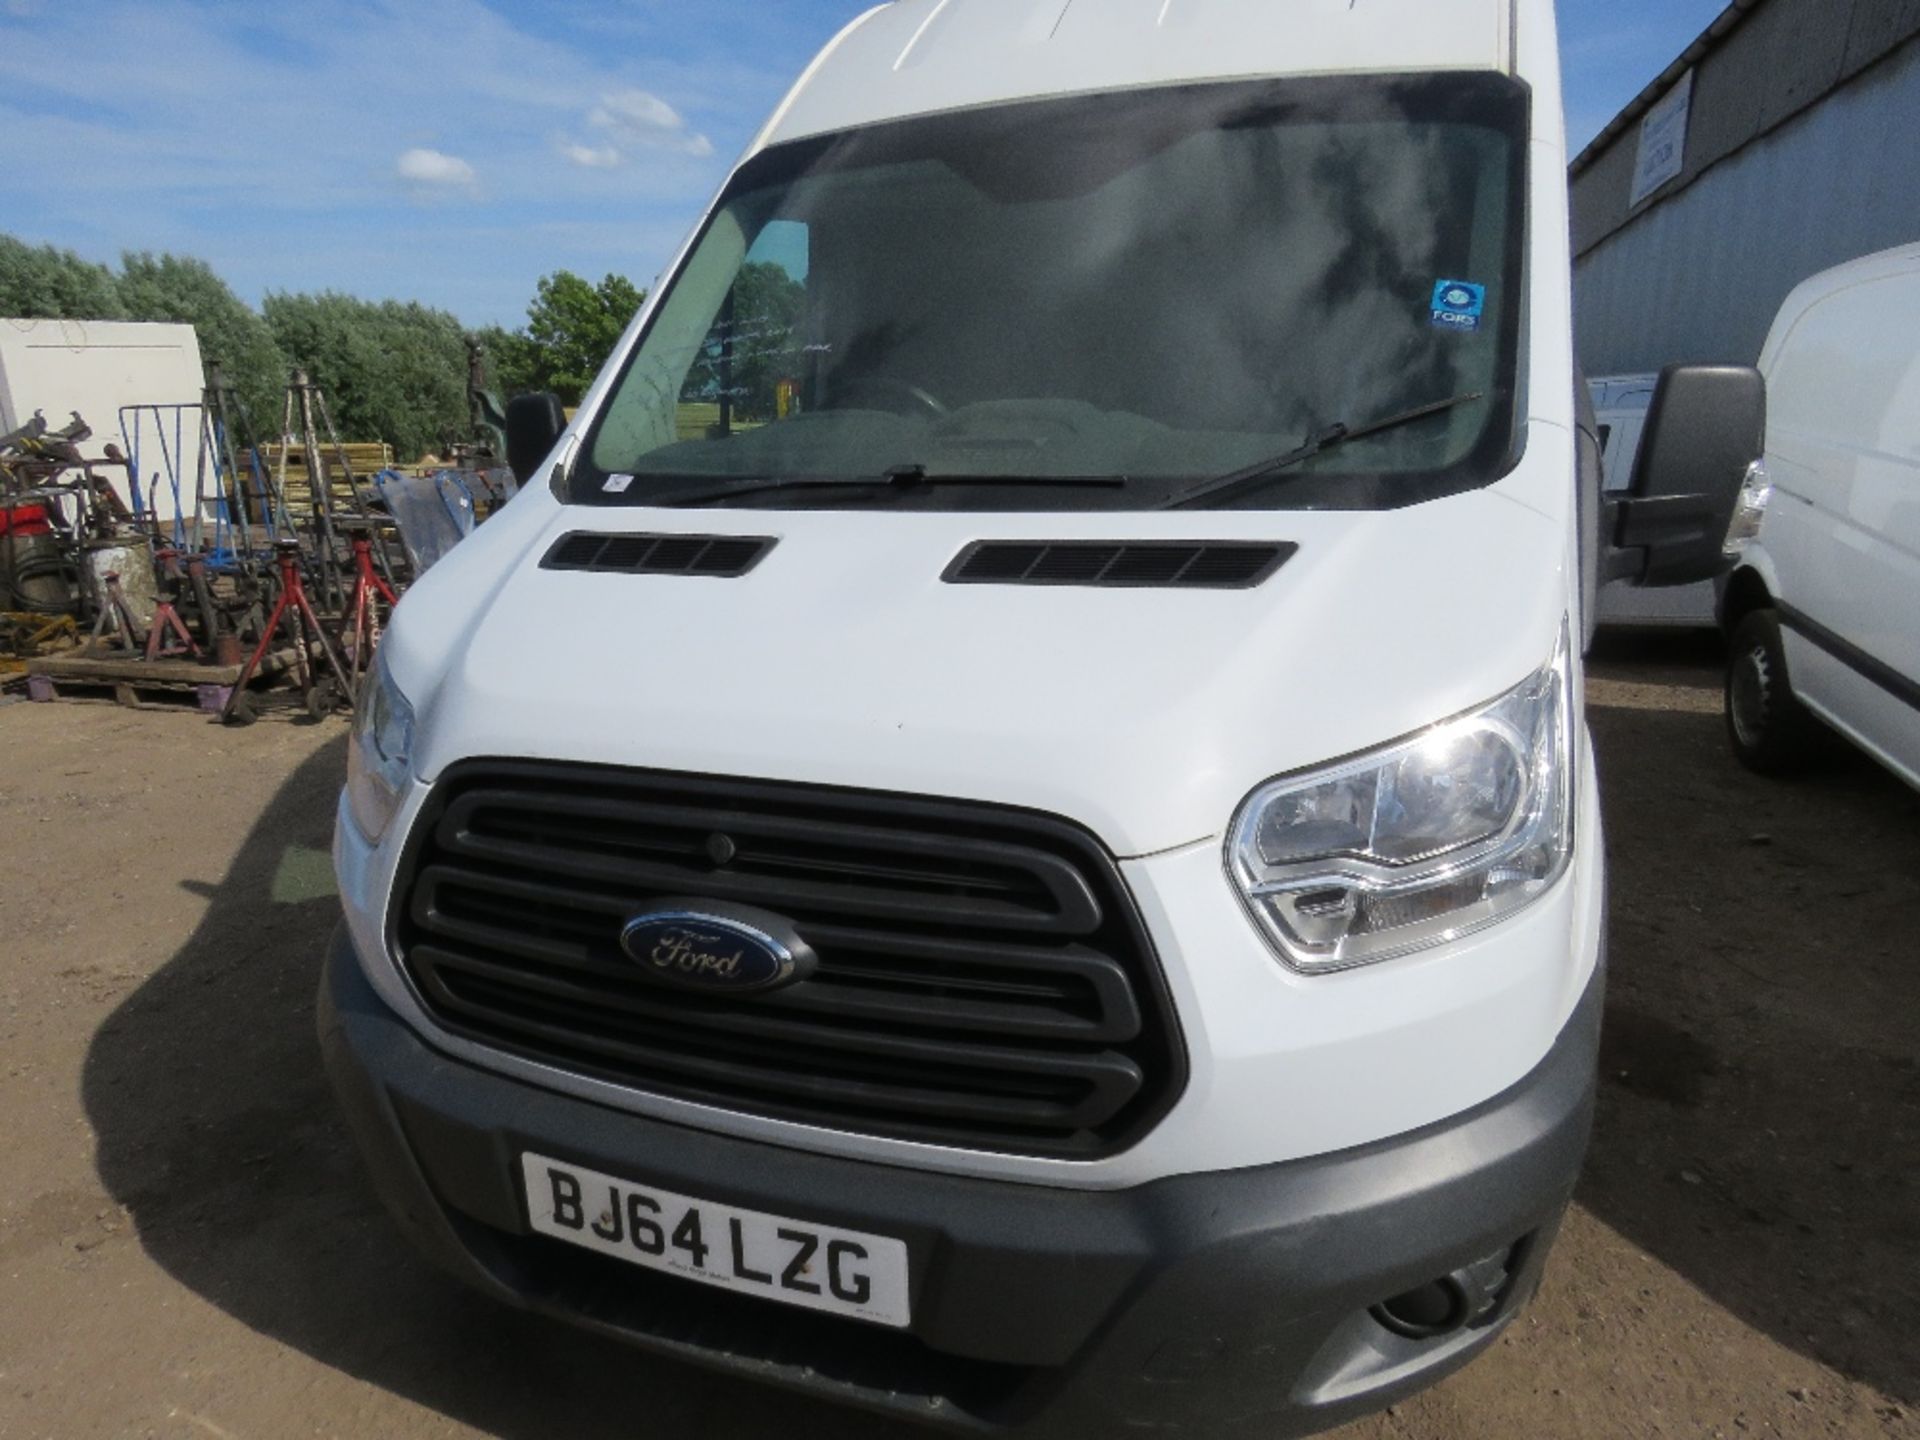 FORD TRANSIT LWB HIGH TOP PANEL VAN REG:BJ64 LZG. PREVIOUSLY USED AS FITTER'S VEHICLE SO HAS RACKIN - Image 2 of 11